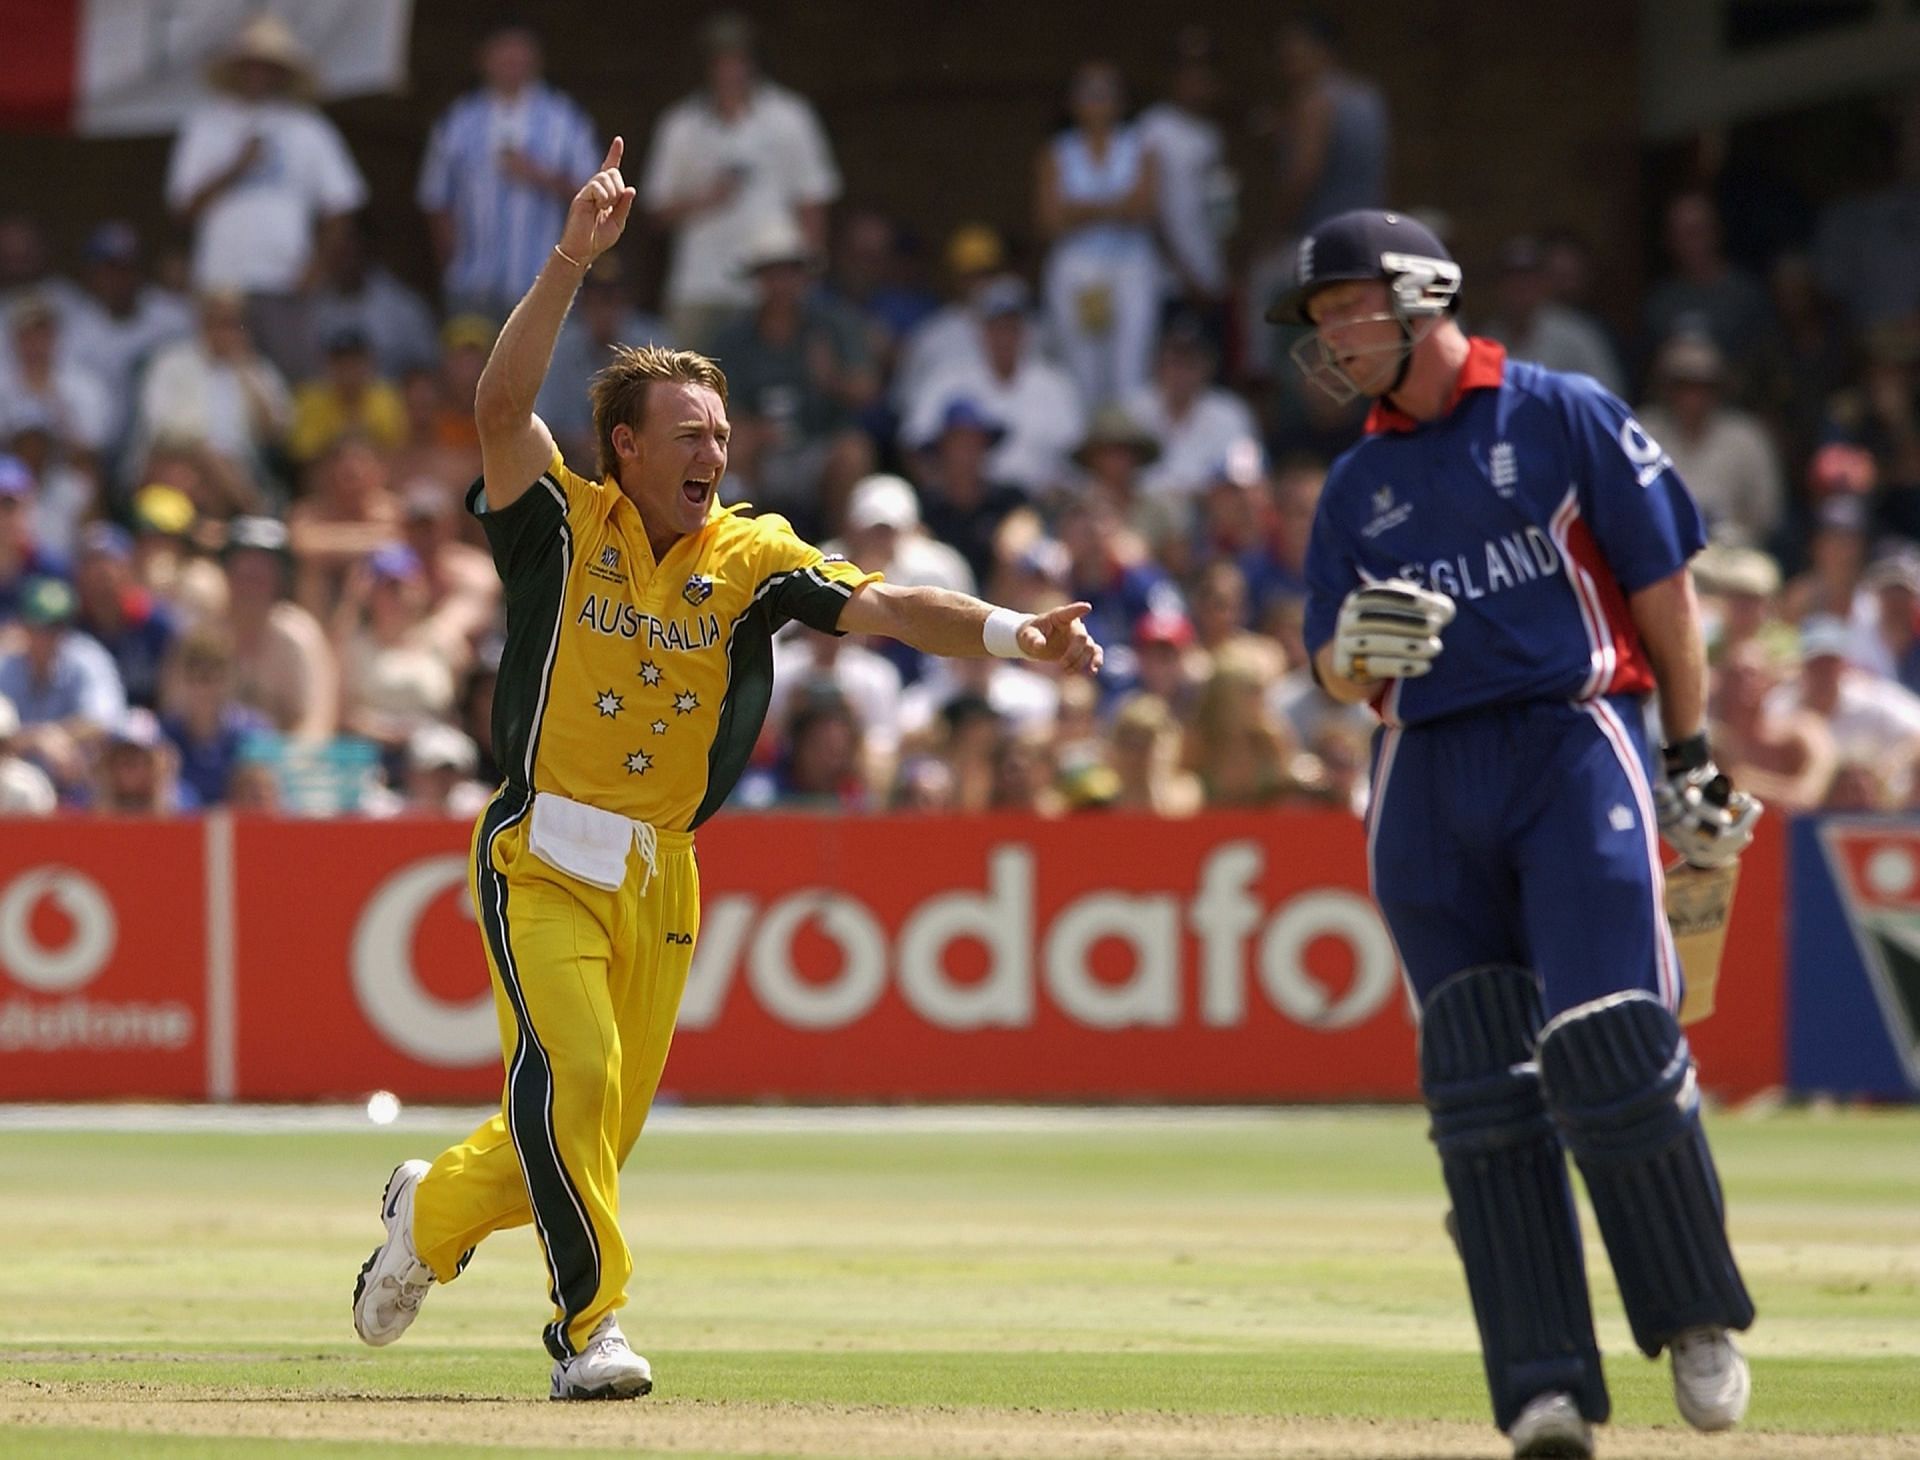 Andy Bichel of Australia celebrates the wicket of Paul Collingwood of England [Getty Images]